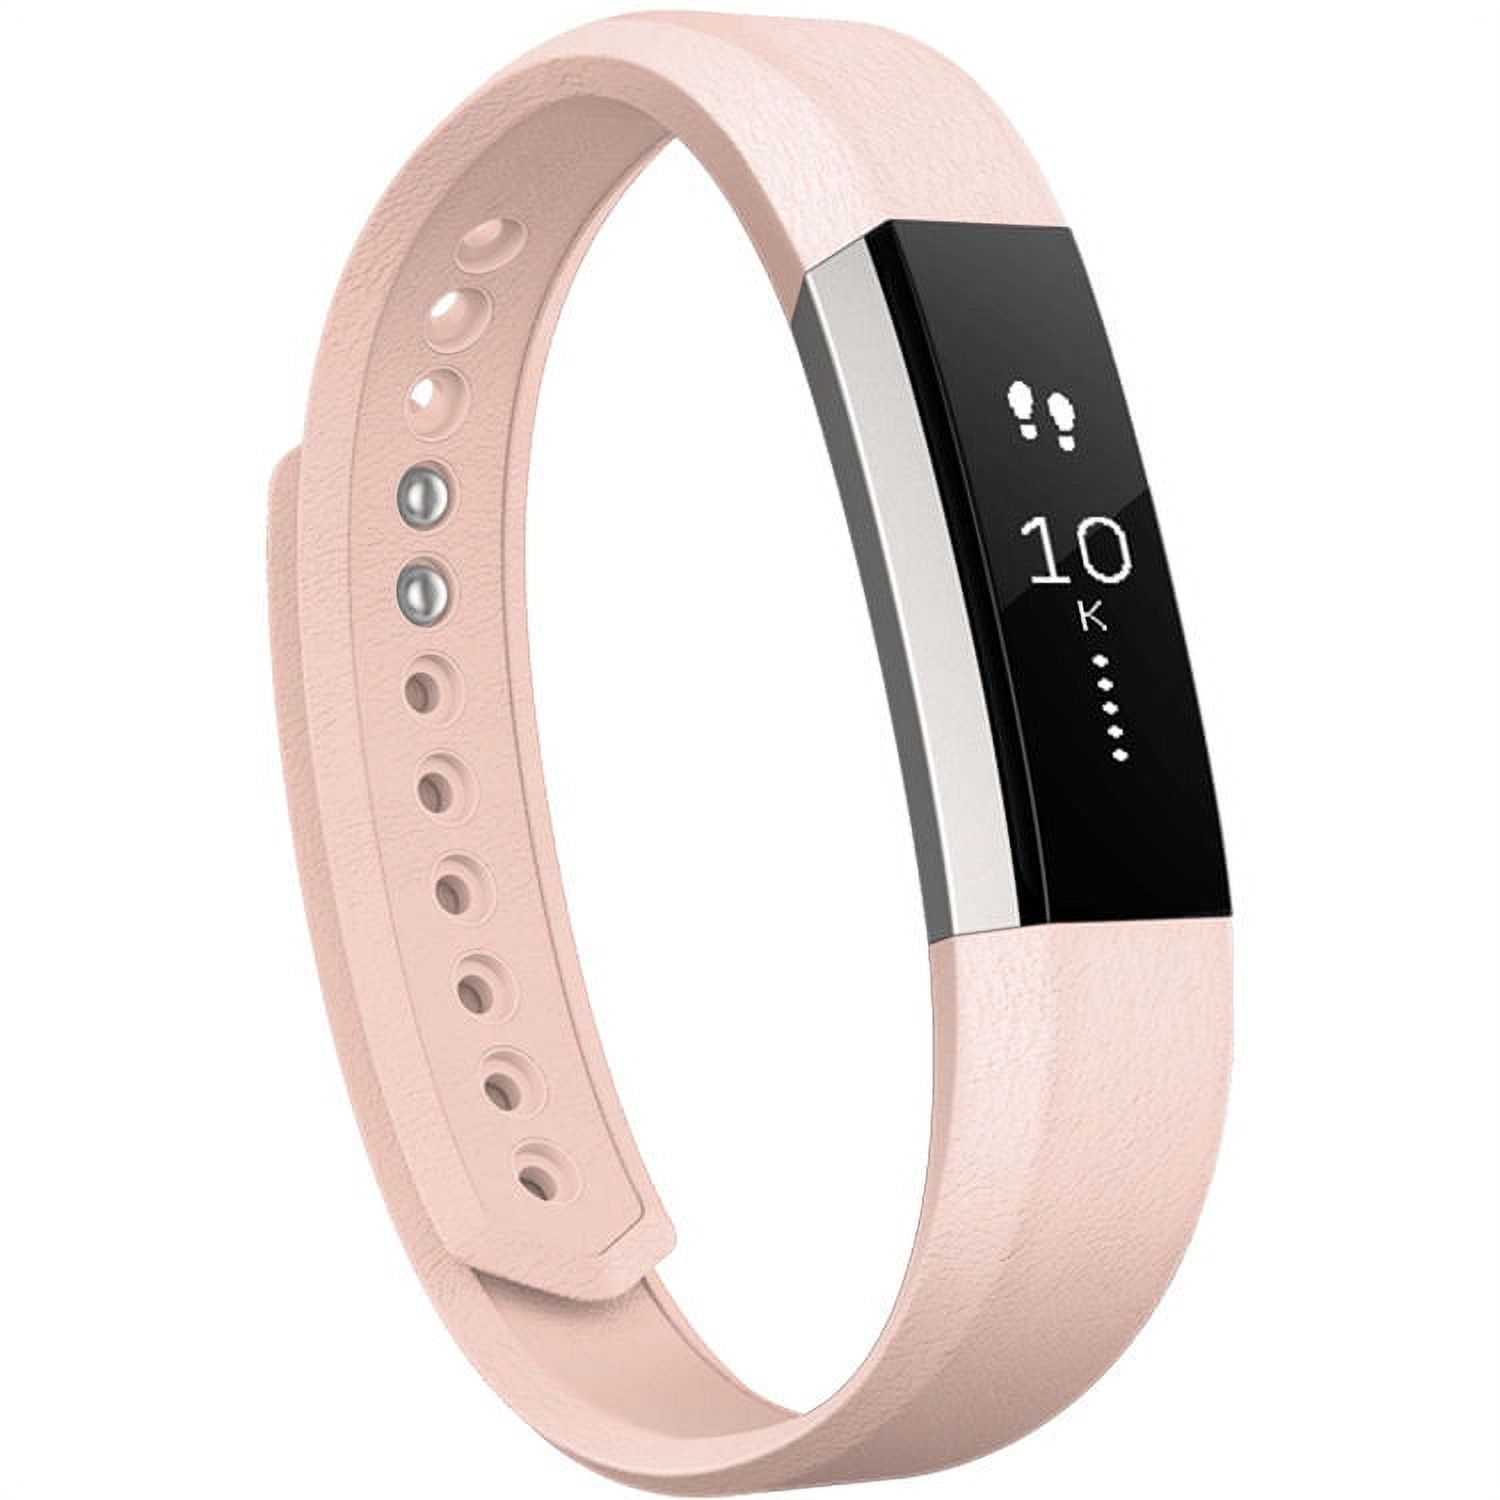 Fitbit Alta Leather Band Large, Blush Pink - image 1 of 6